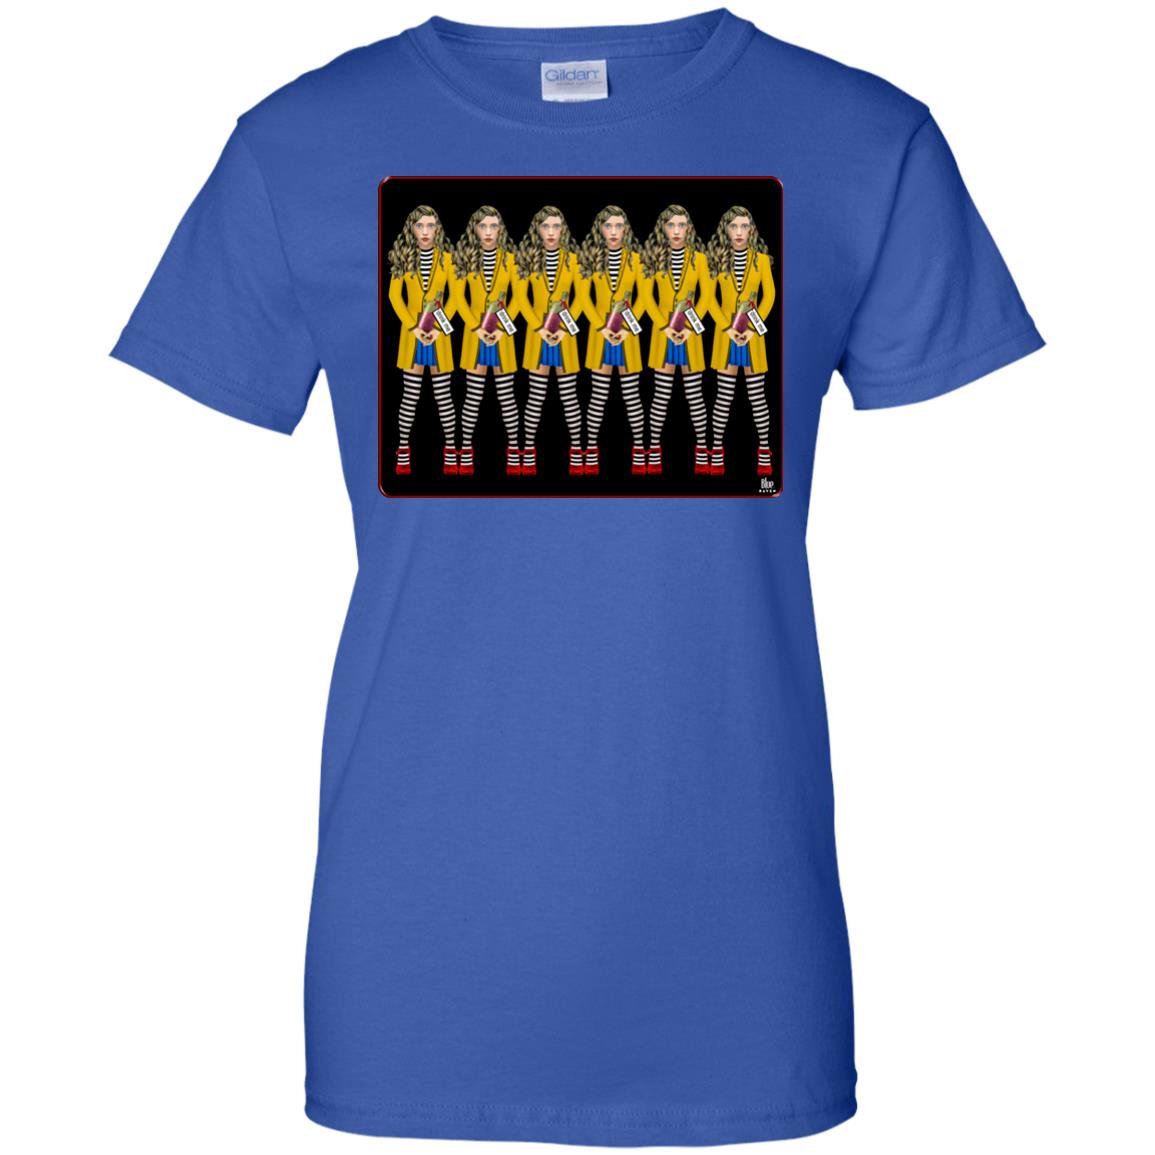 drink me replay - Women's Relaxed Fit T-Shirt